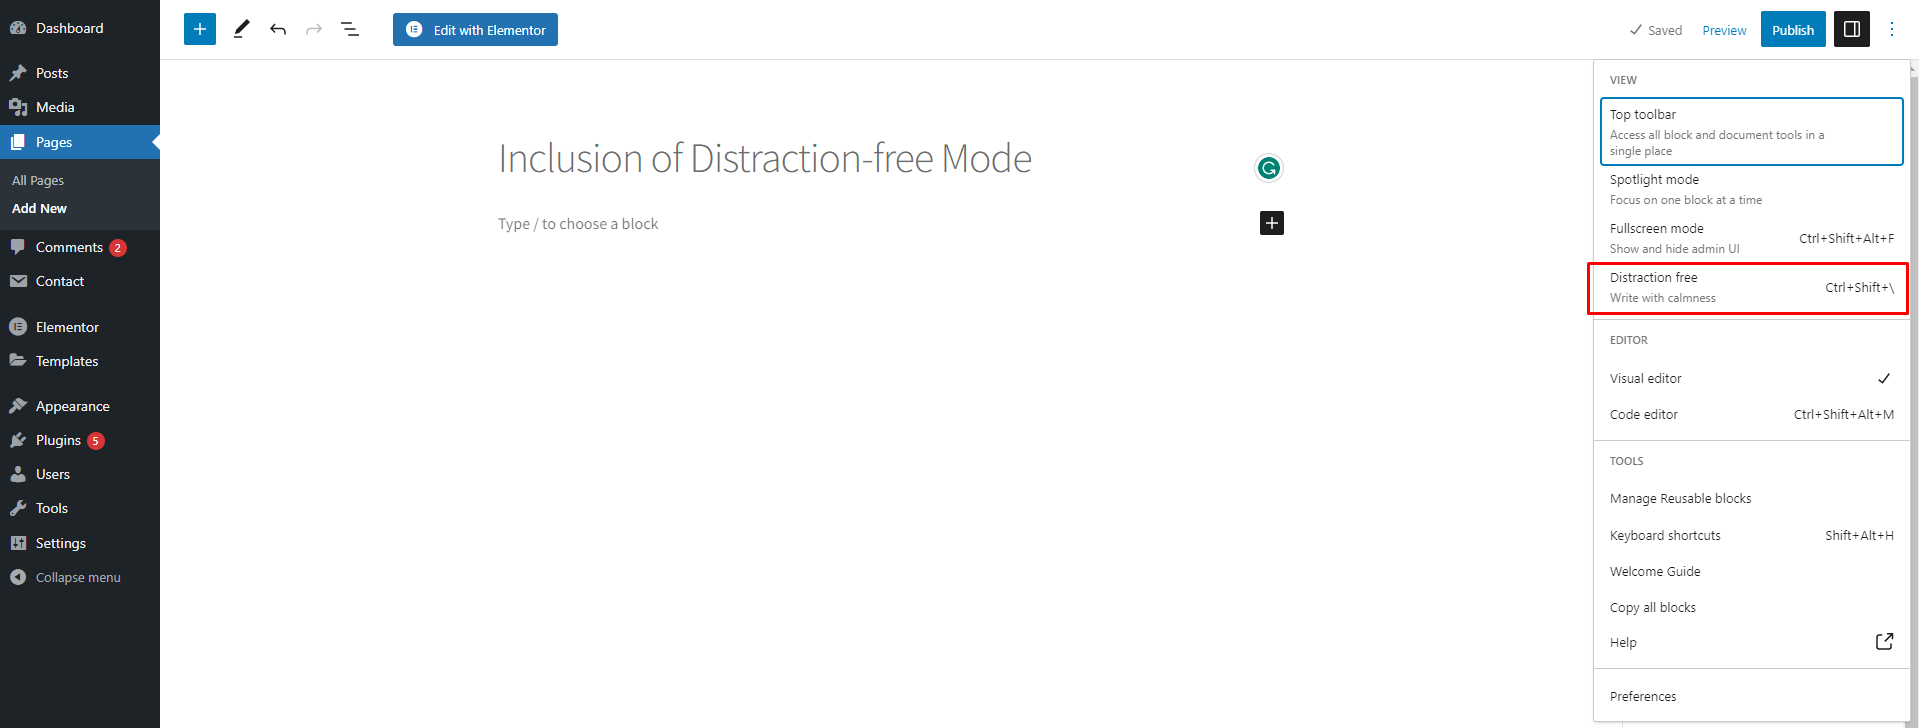 Inclusion of Distraction free Mode